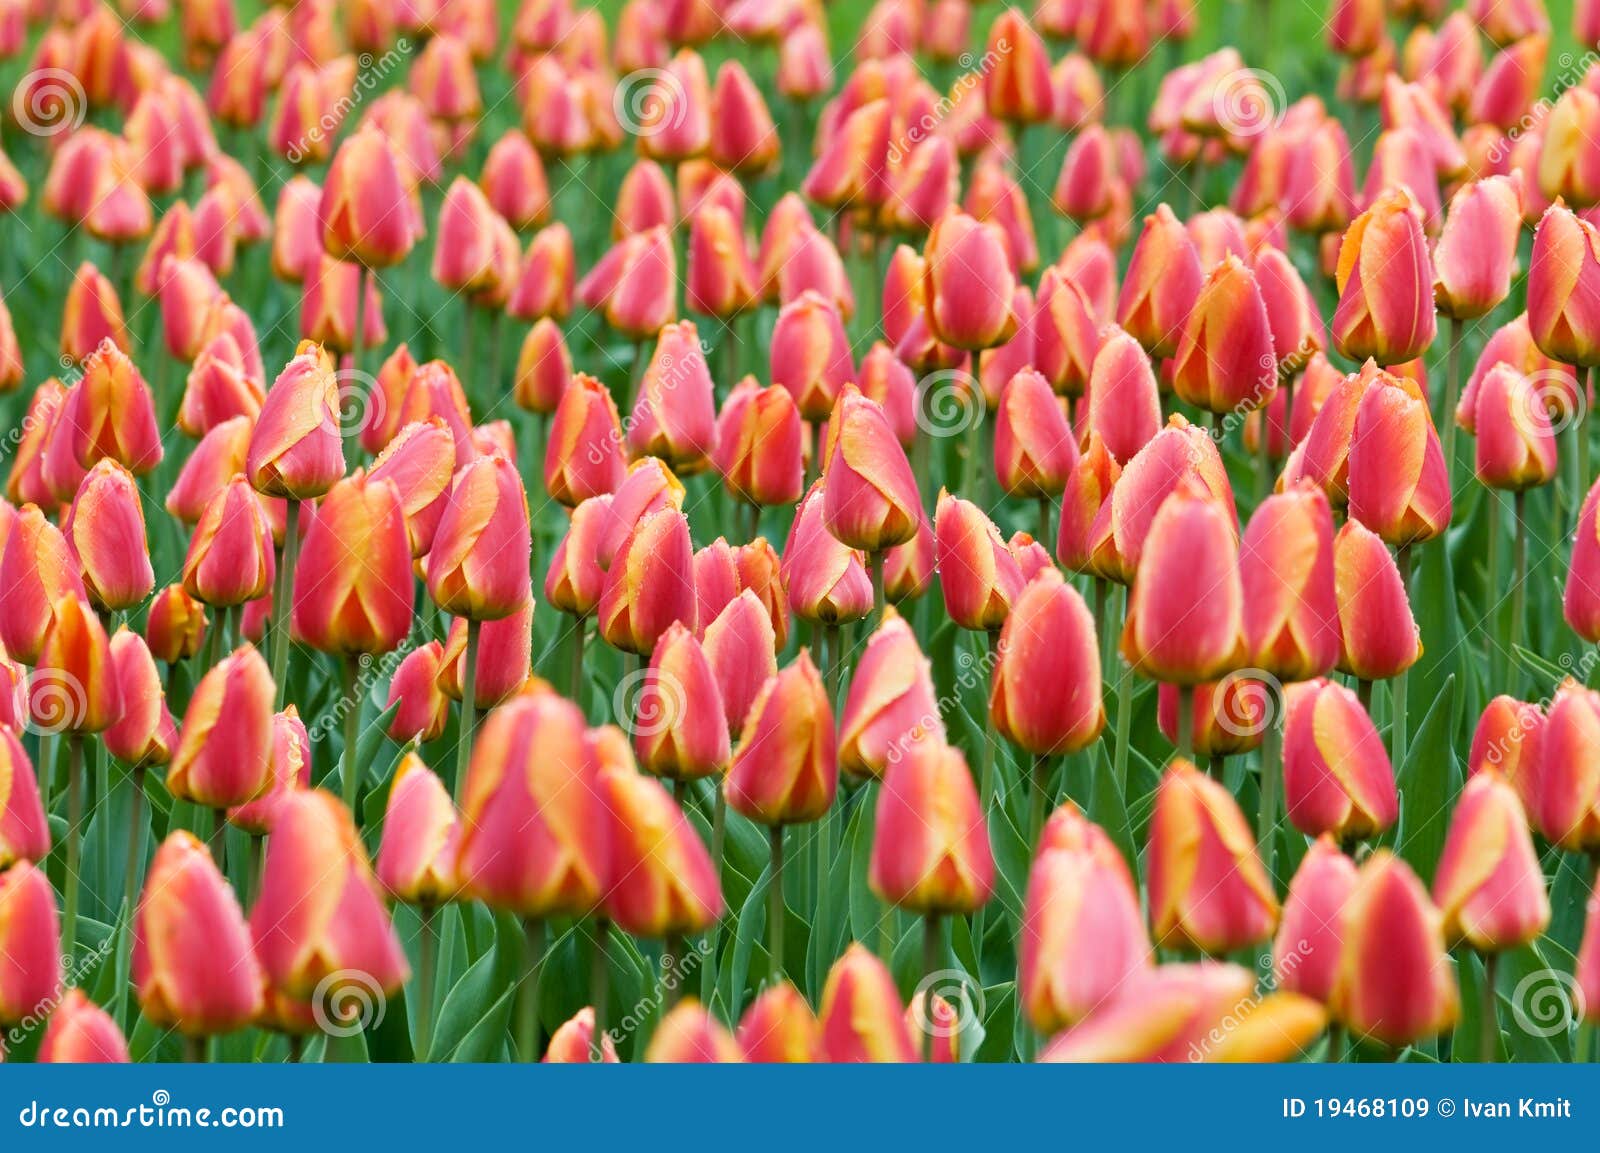 Tulip stock image. Image of spring, field, space, flower - 19468109